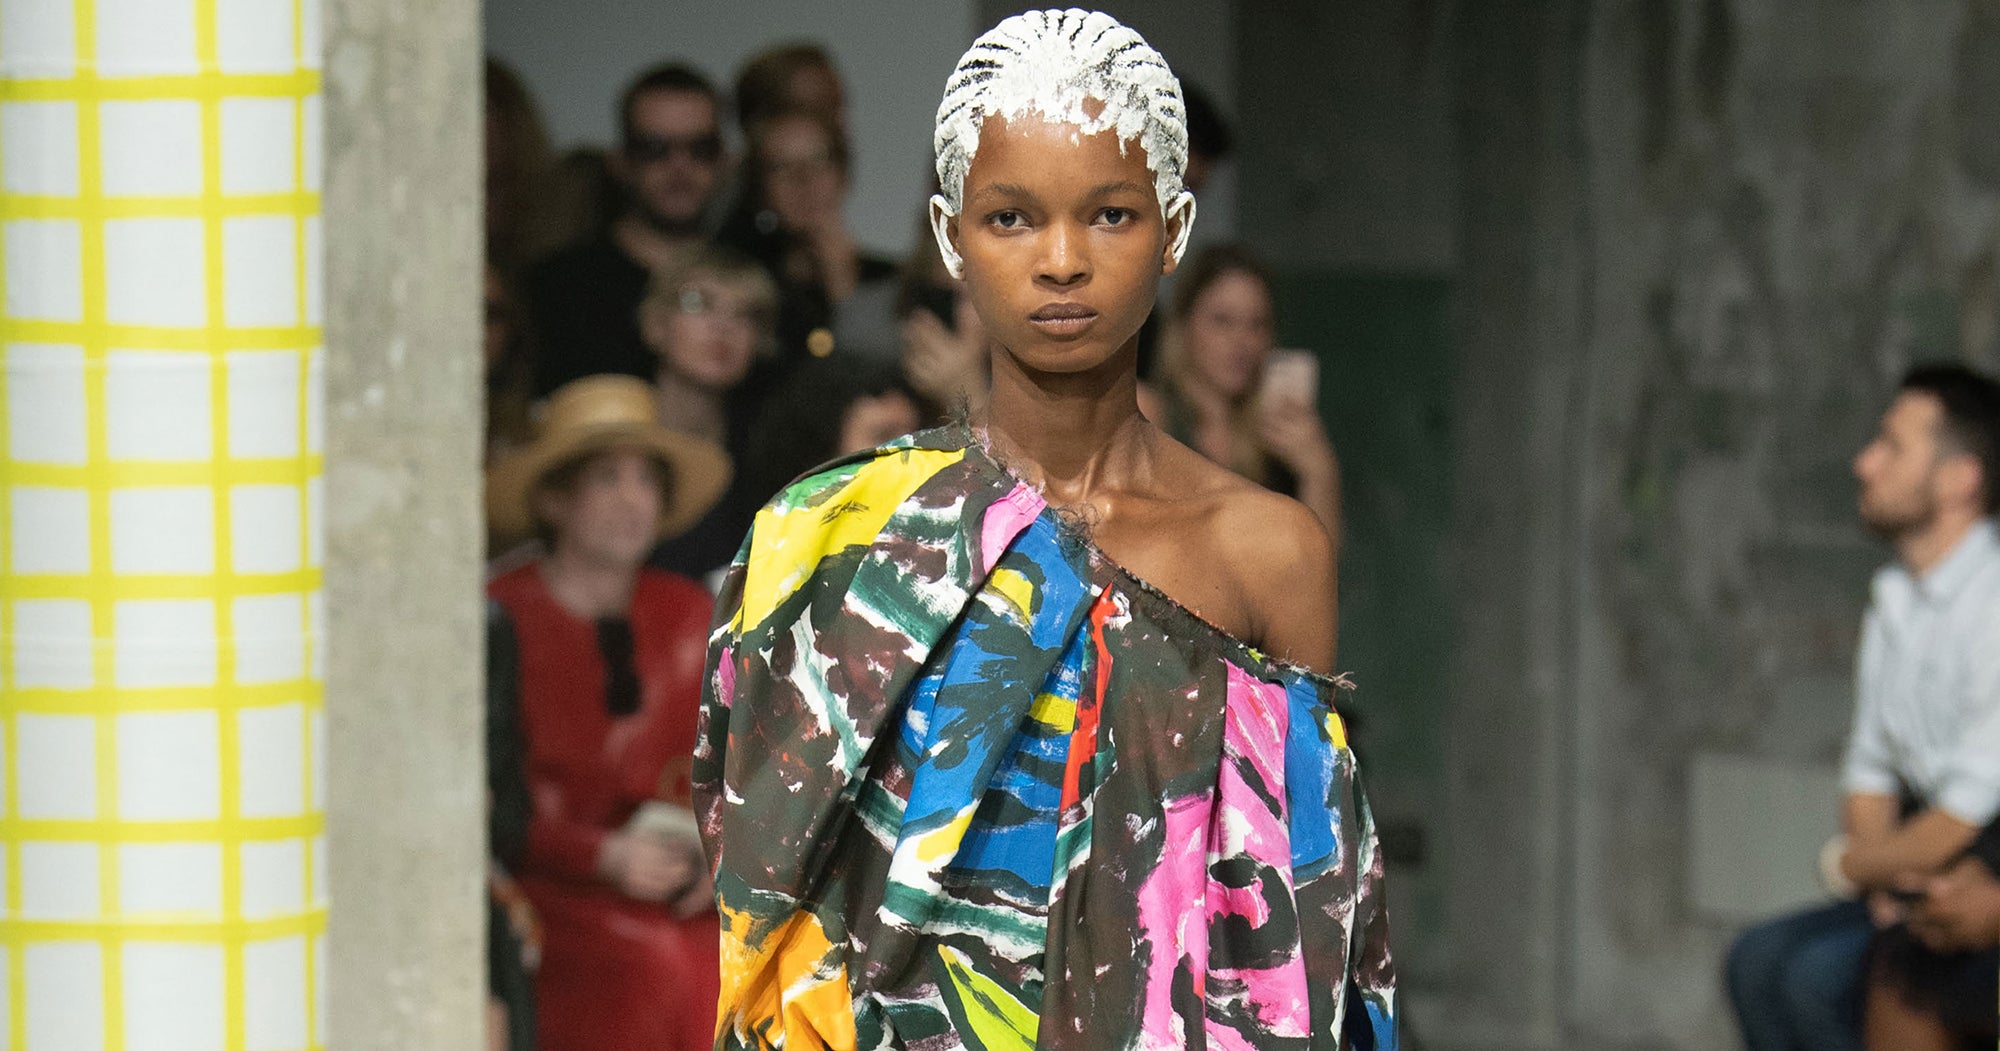 Marni Made Up A Drug For Its Spring 2020 Collection